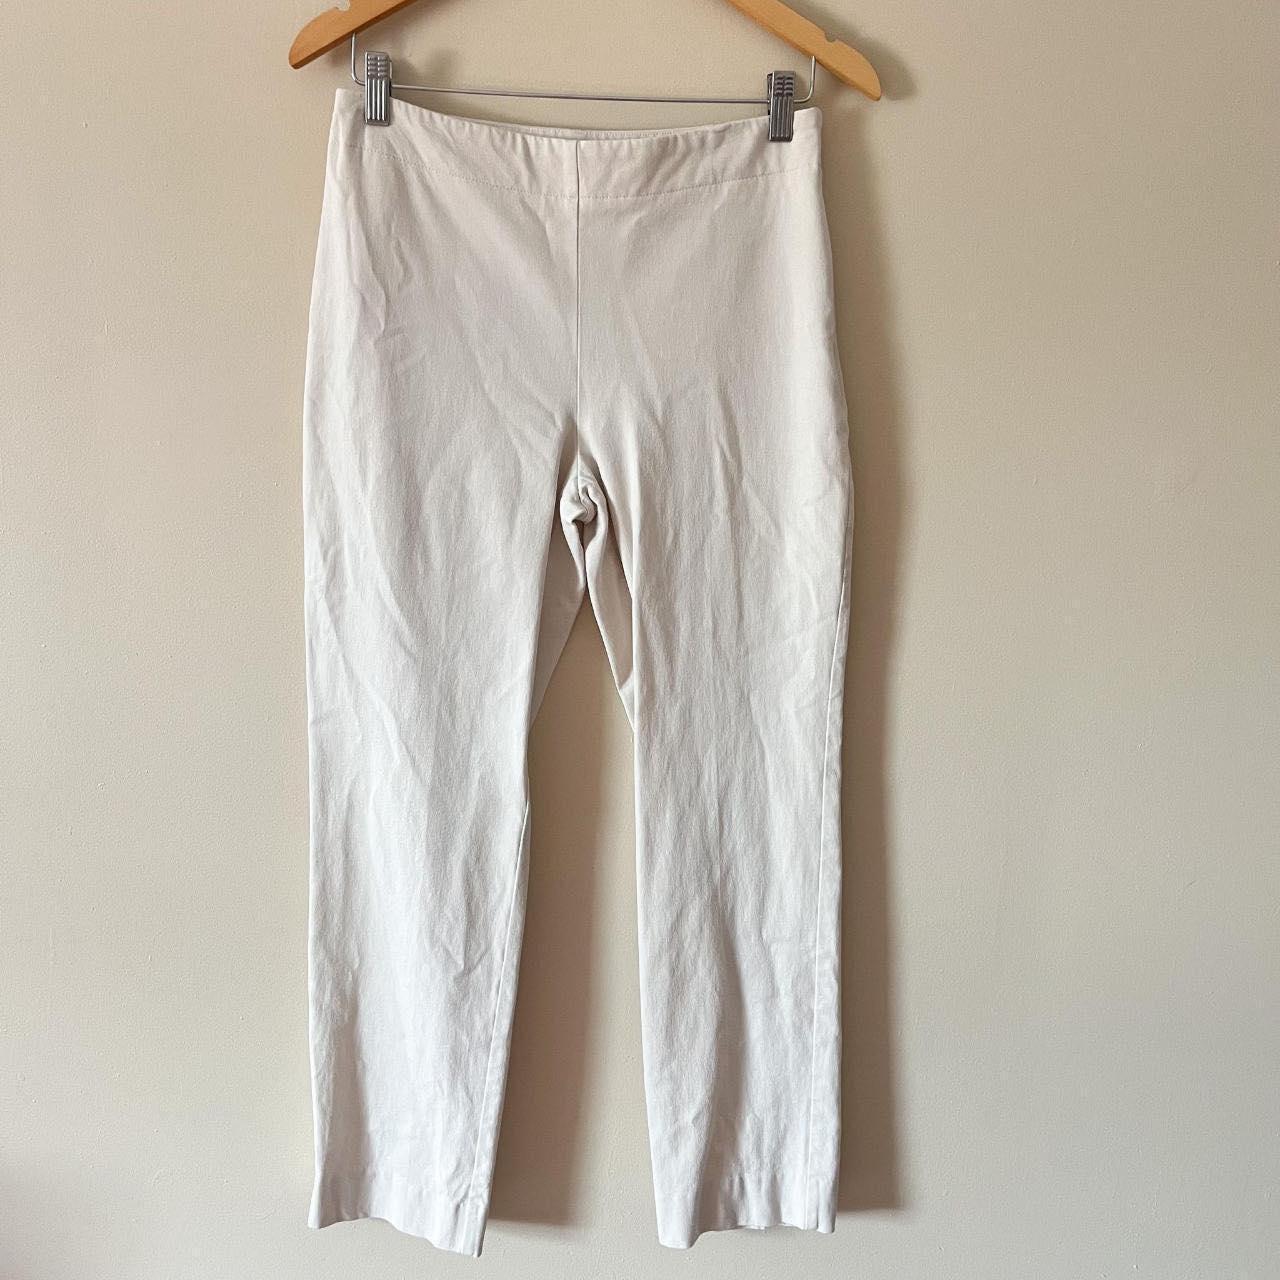 Update 205+ size 4 trousers best